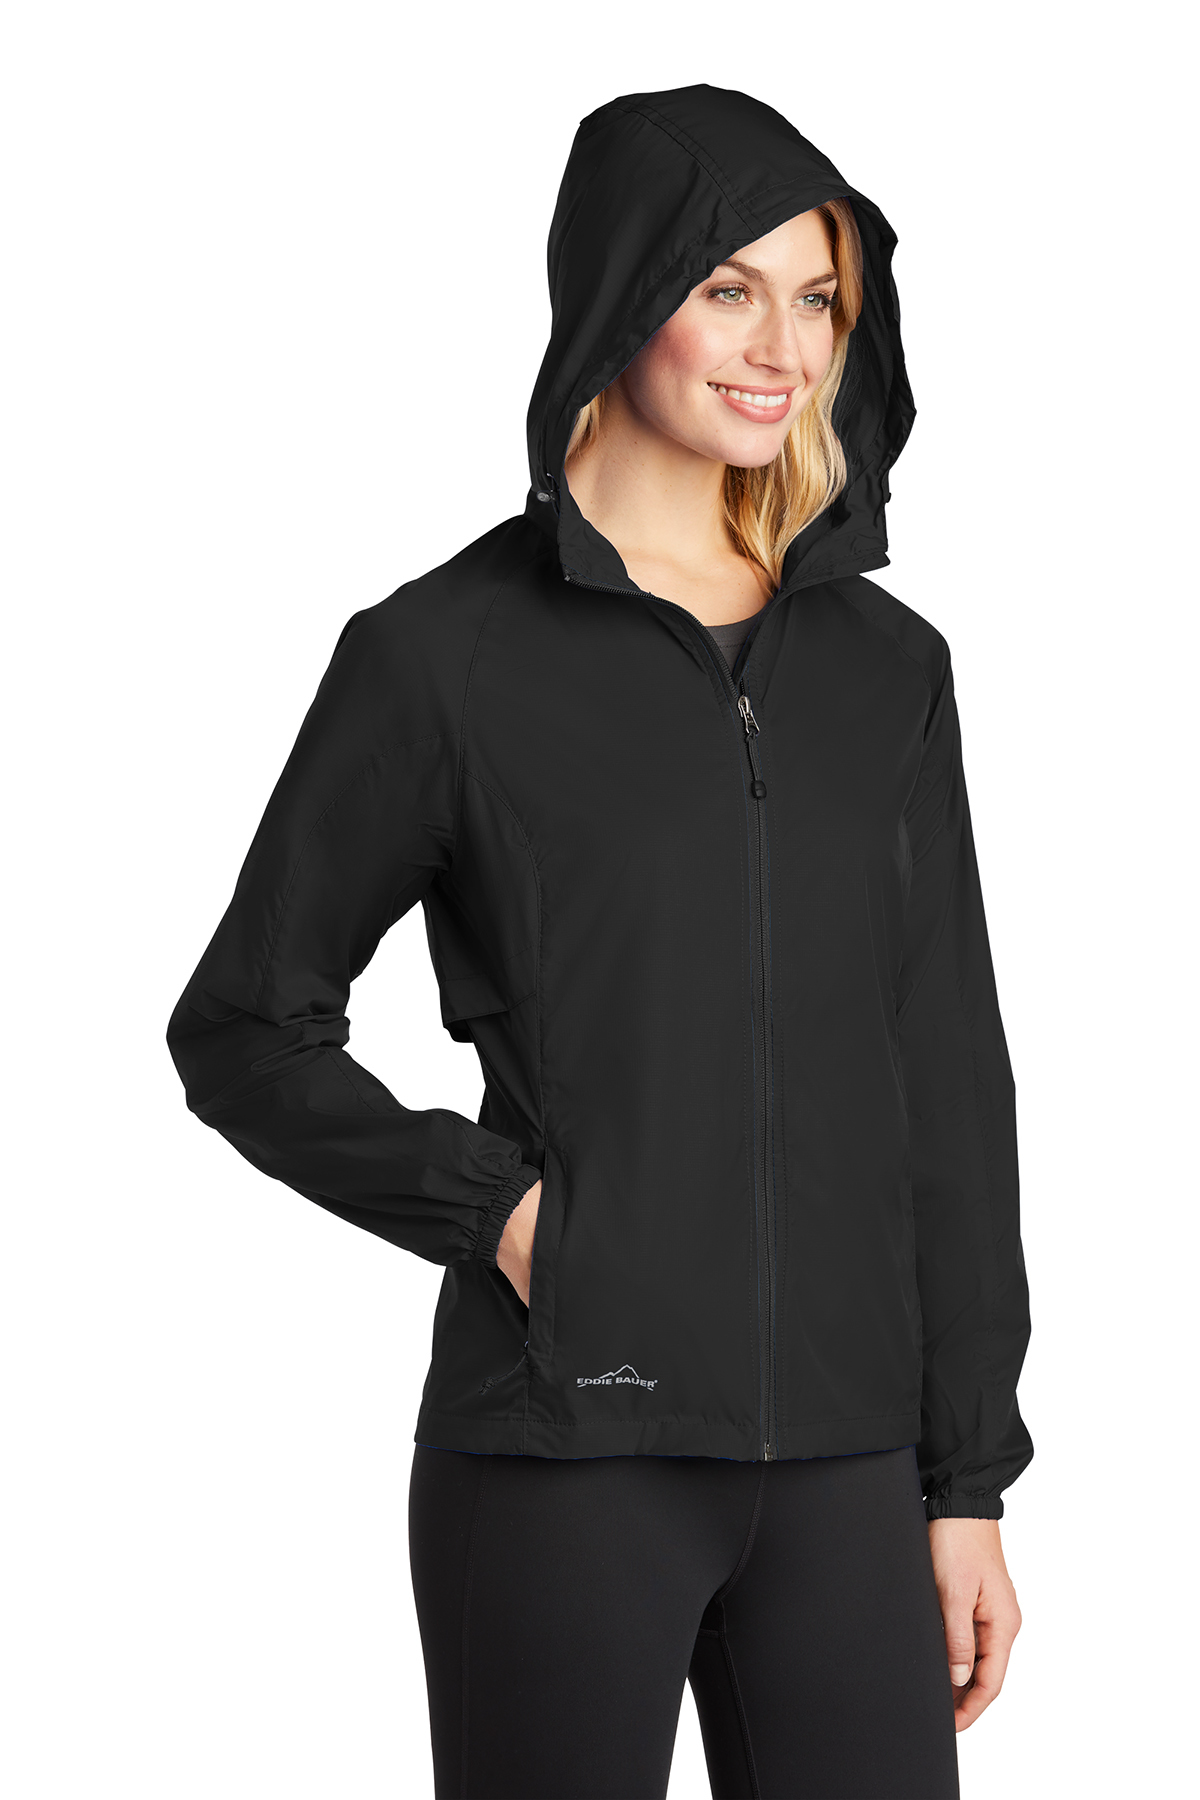 Eddie Bauer - Ladies Packable Wind Jacket | Product | Company Casuals